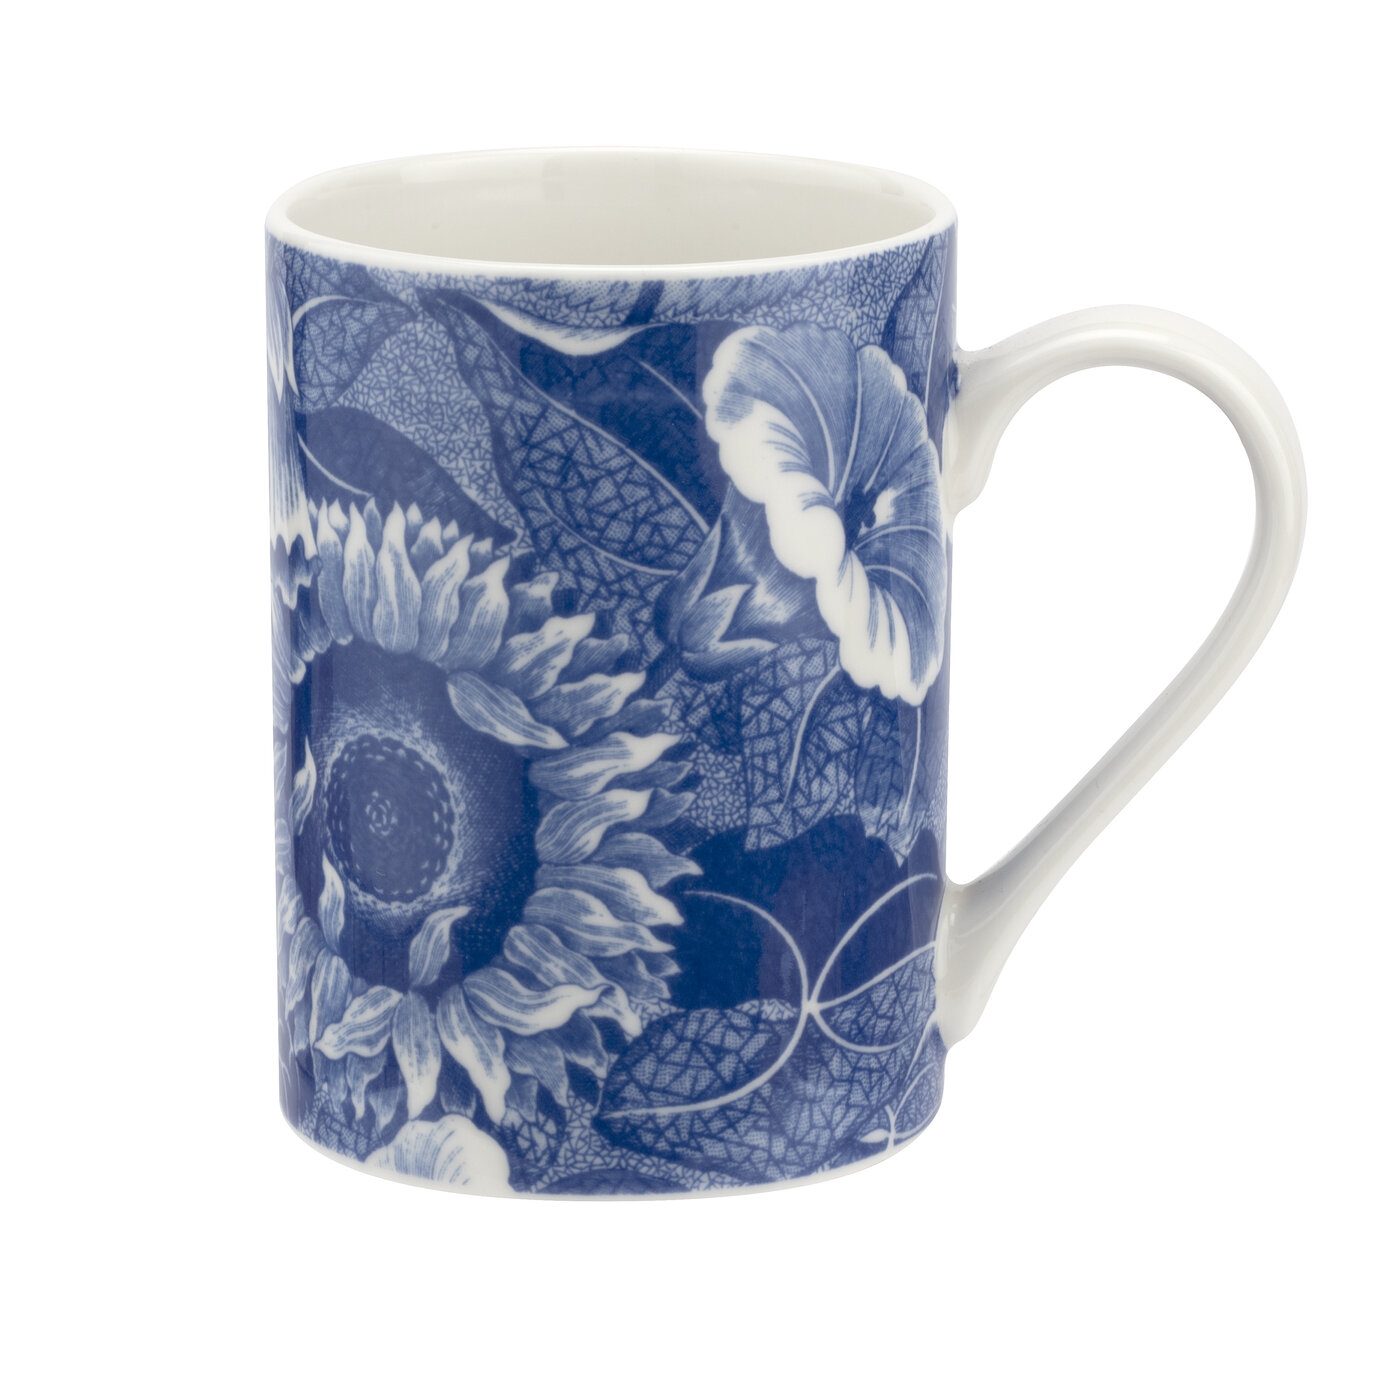 Pimpernel Blue Room Sunflower Set of 2 Mugs and Tray image number null